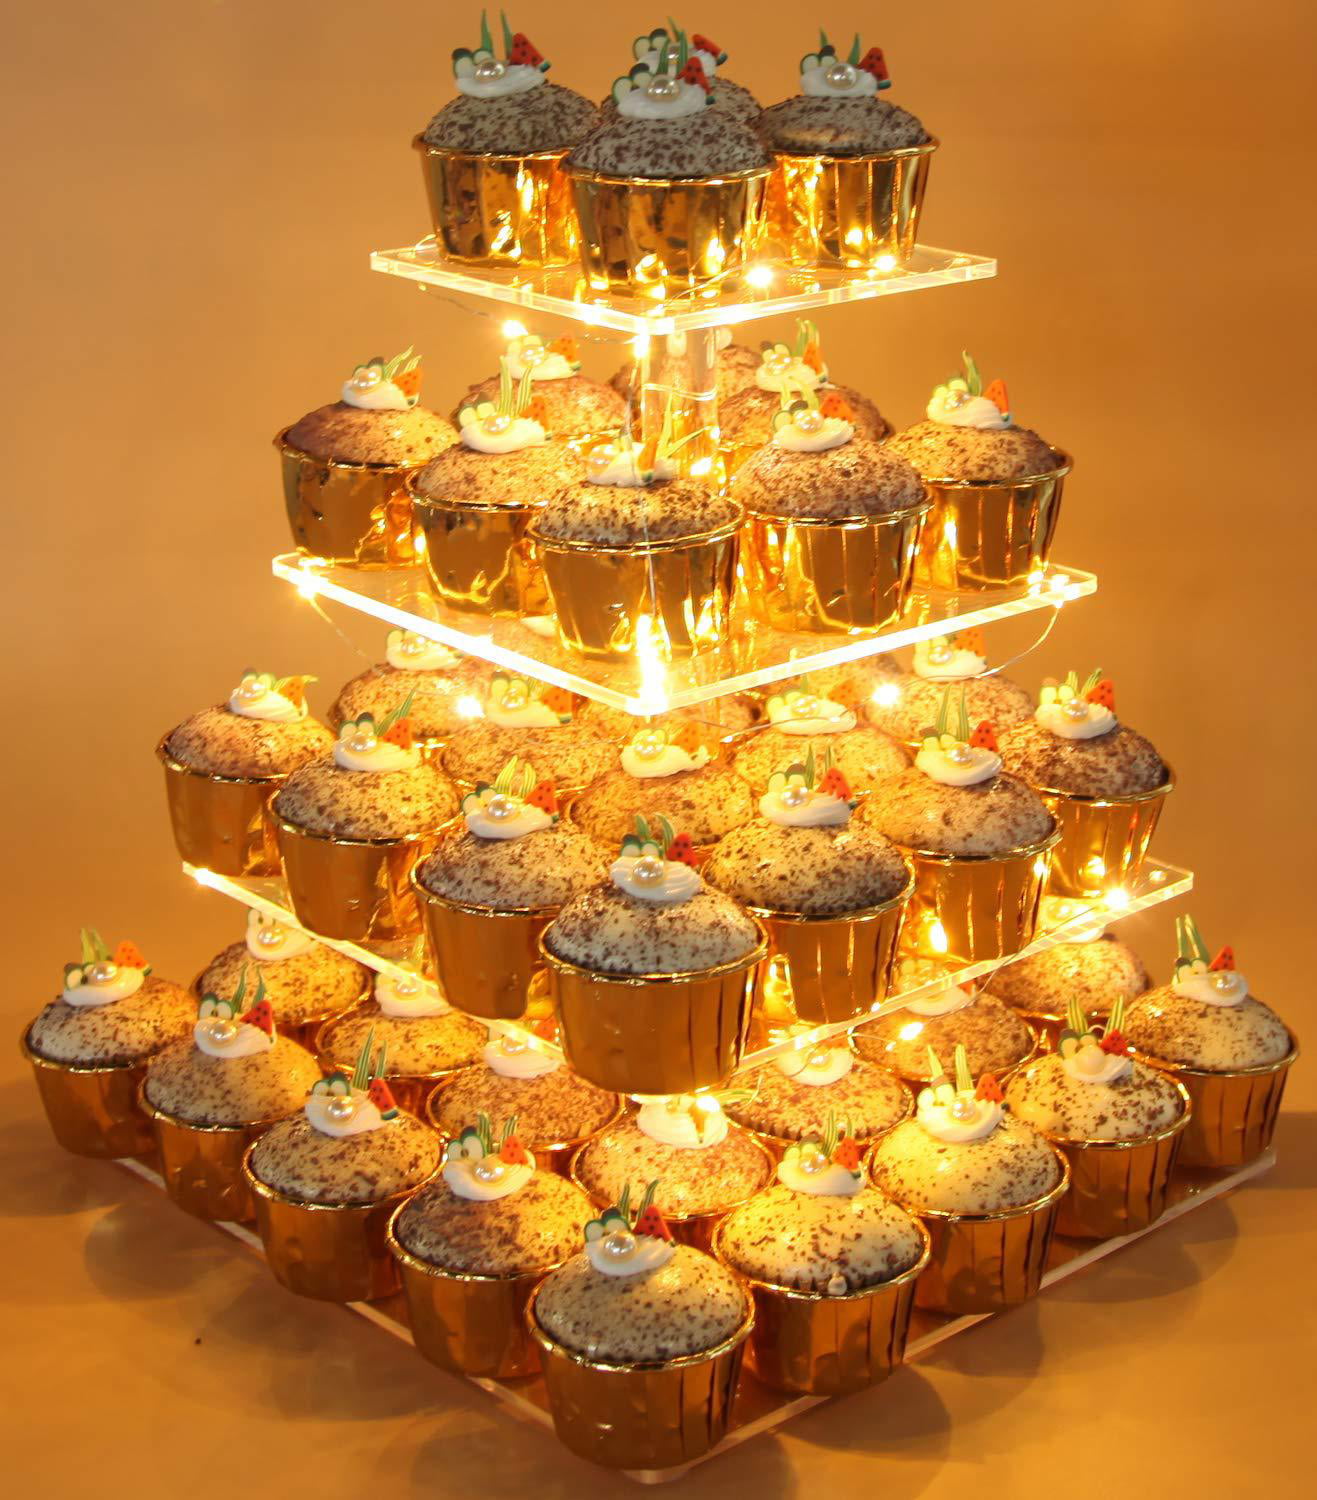 4 Tiers Cake Display Stand w/ LED String Lights DIY Cupcake Dessert Holder Party 